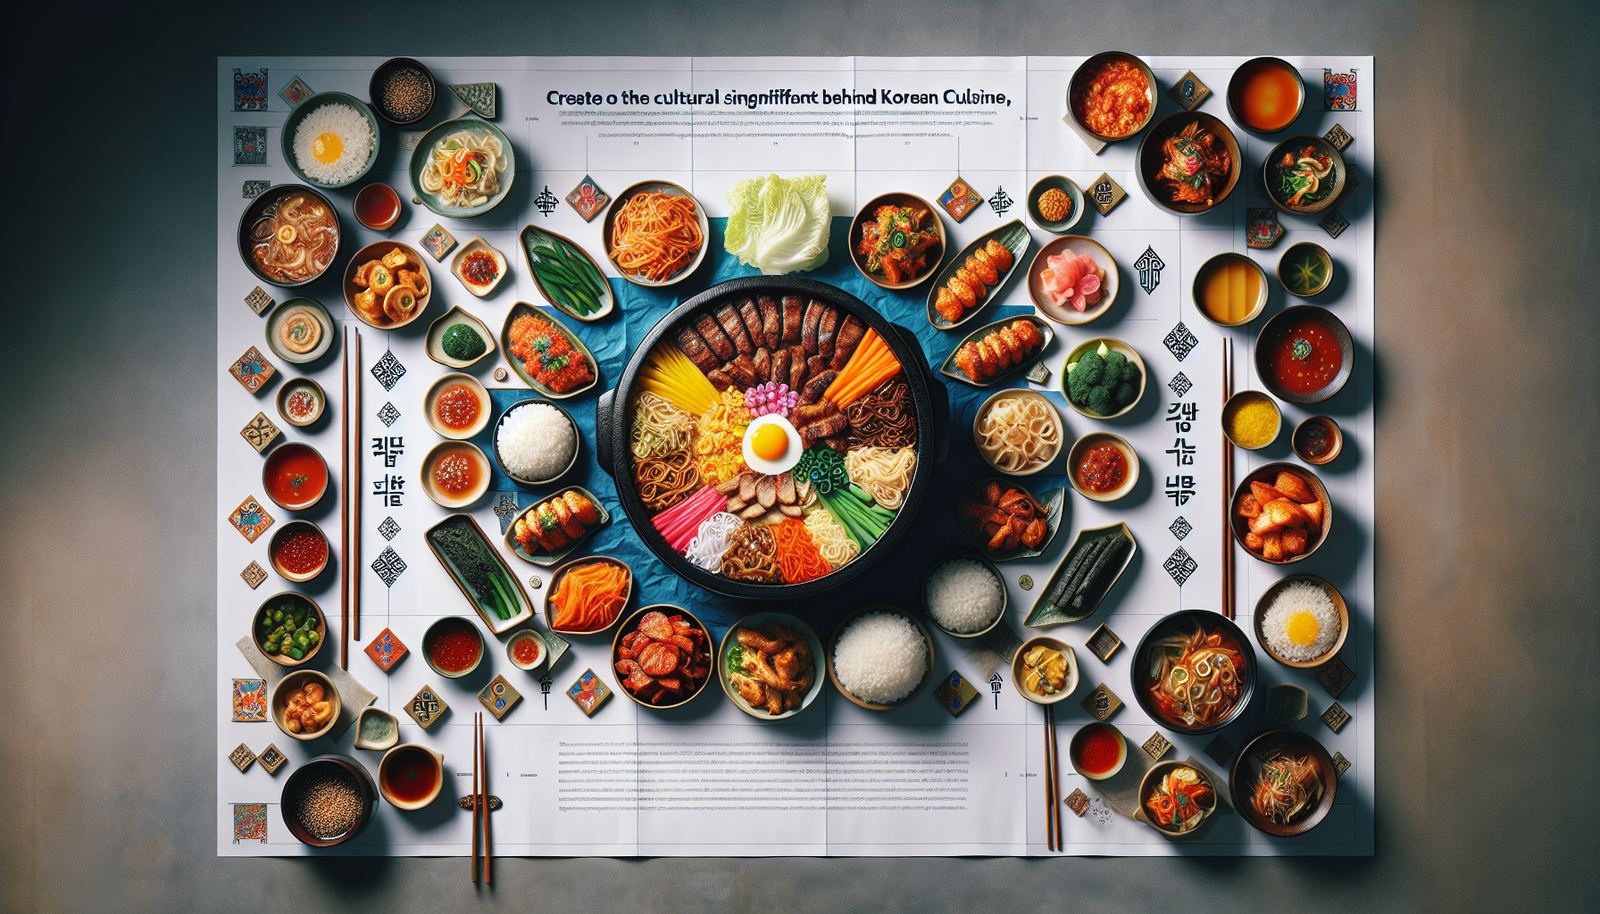 What Are The Symbolic Meanings Behind Certain Korean Dishes?